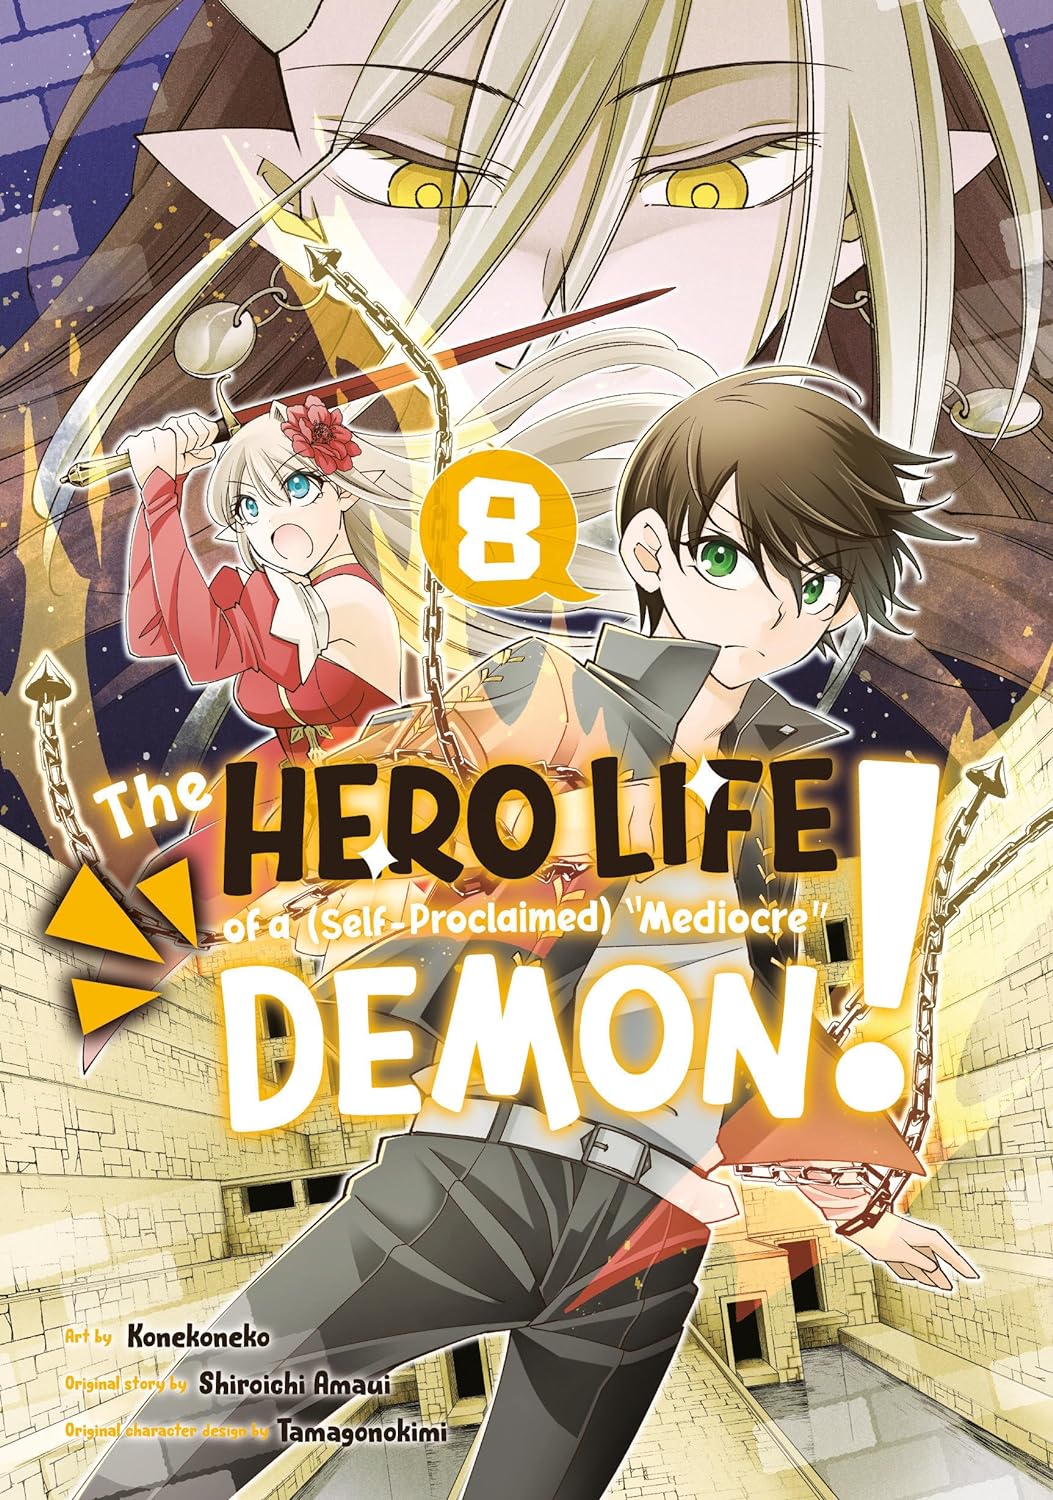 (05/12/2023) The Hero Life of a (Self-Proclaimed) Mediocre Demon! Vol. 08